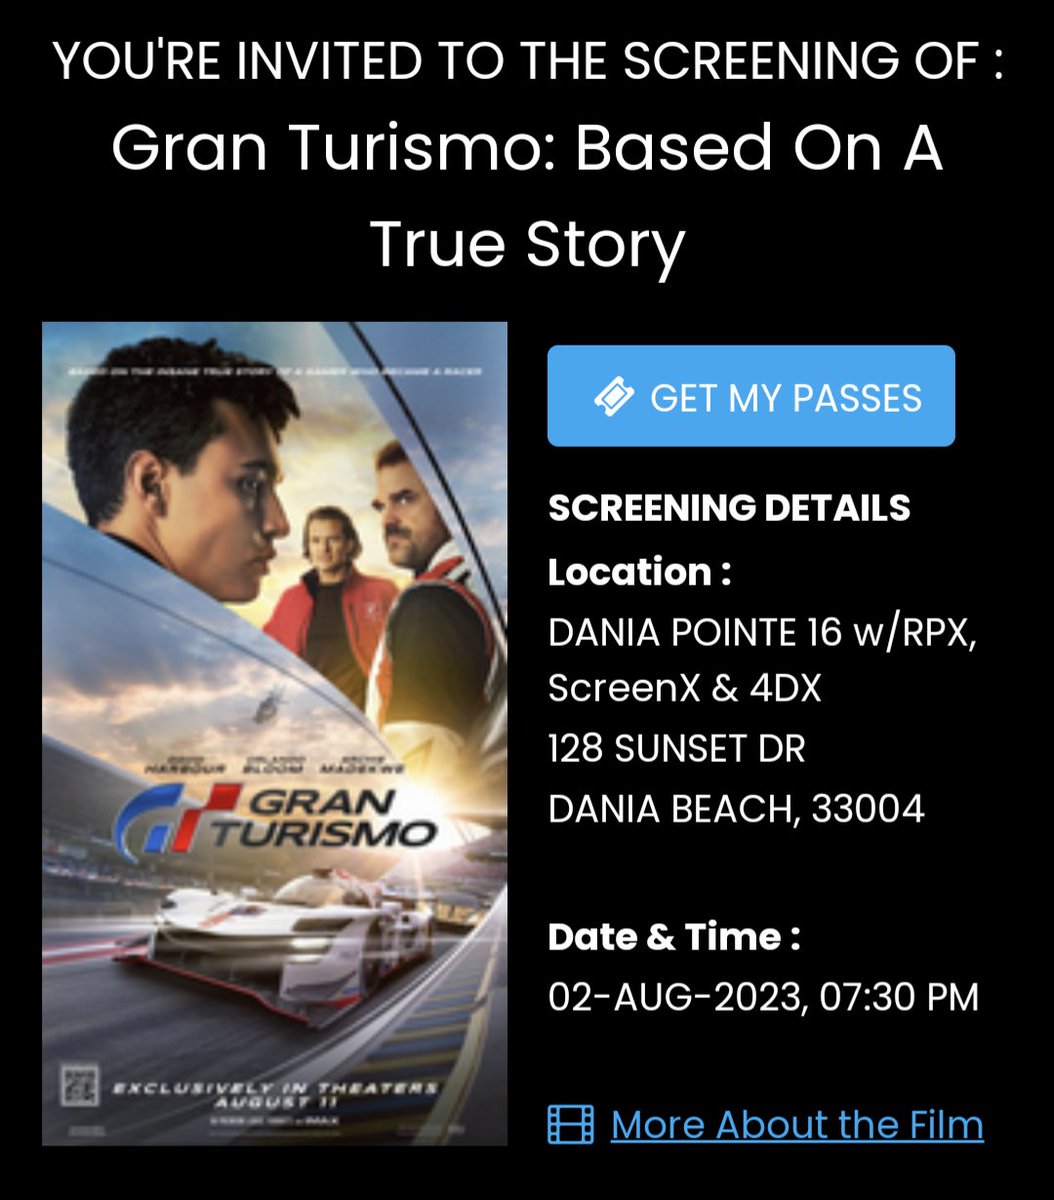 Flynn's family you're invited to see a FREE ADVANCE SCREENING of #GranTurismoMovie ~ this Wed (08.02) at #DaniaPointe - be sure to arrive early because it is first come, first serve - click the link to claim yours: events.sonypictures.com/screenings/uns…
#GranTurismo7  #movienight